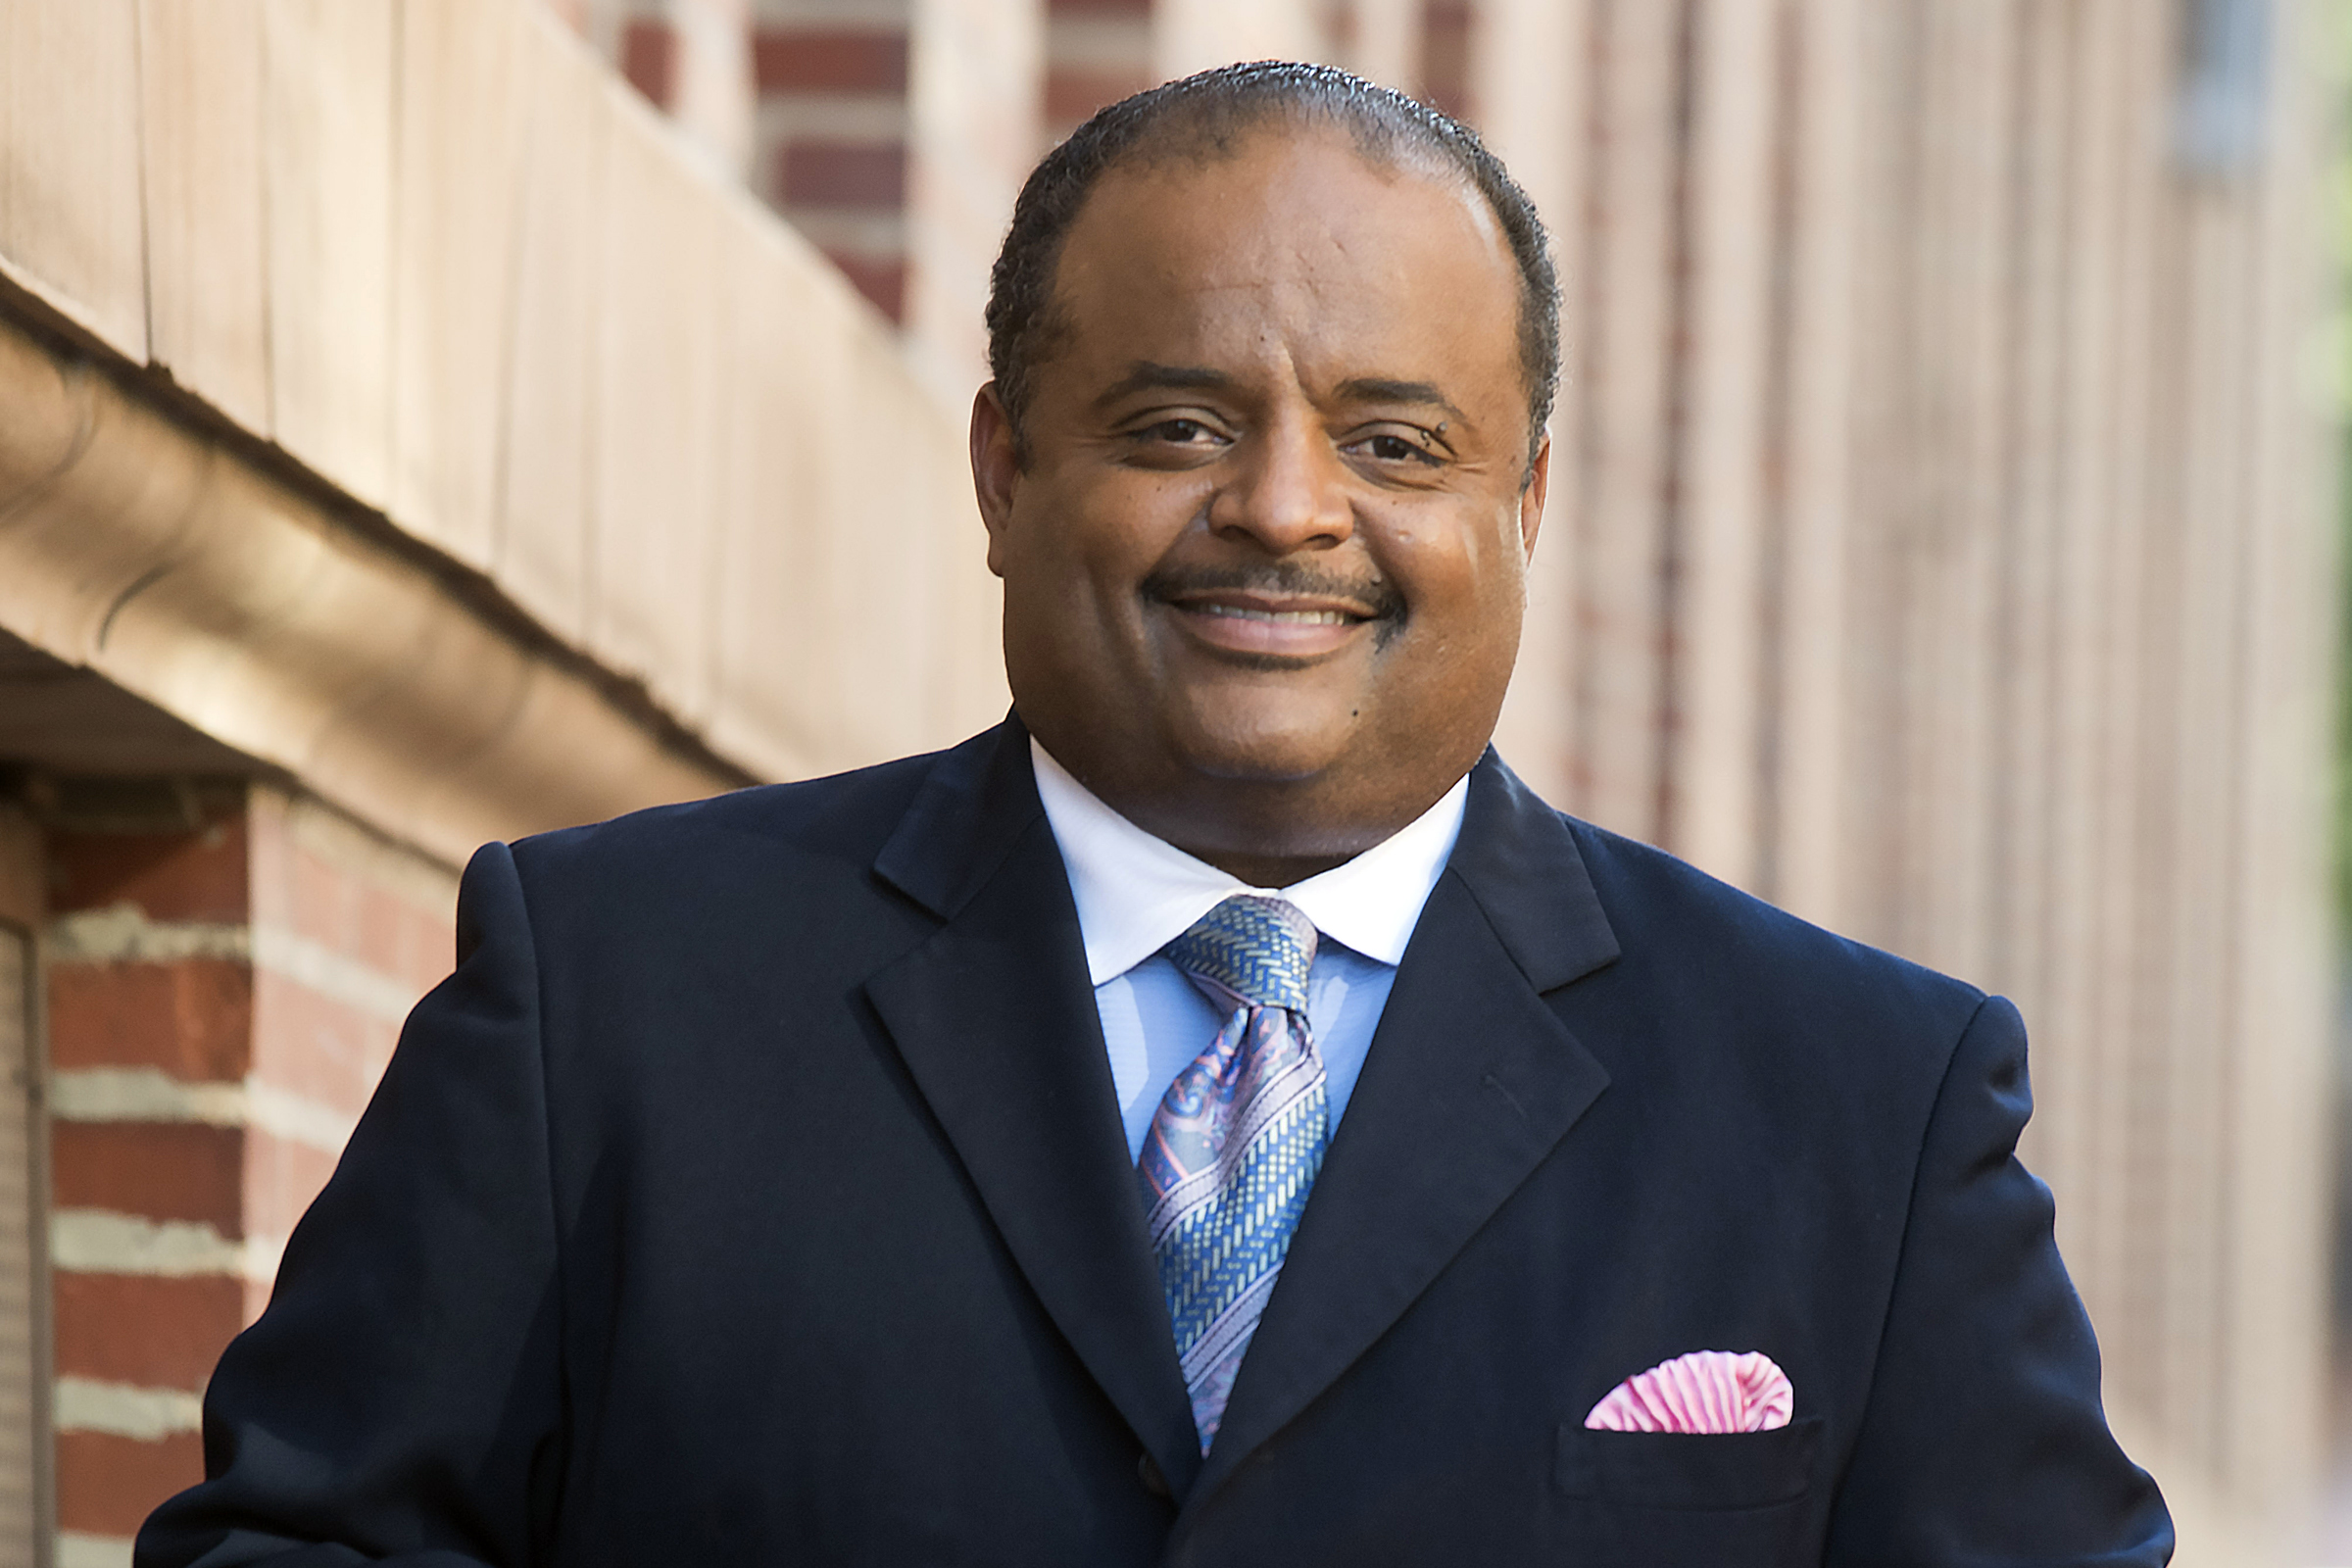 Journalist Roland Martin to speak at Civil Rights Conference 